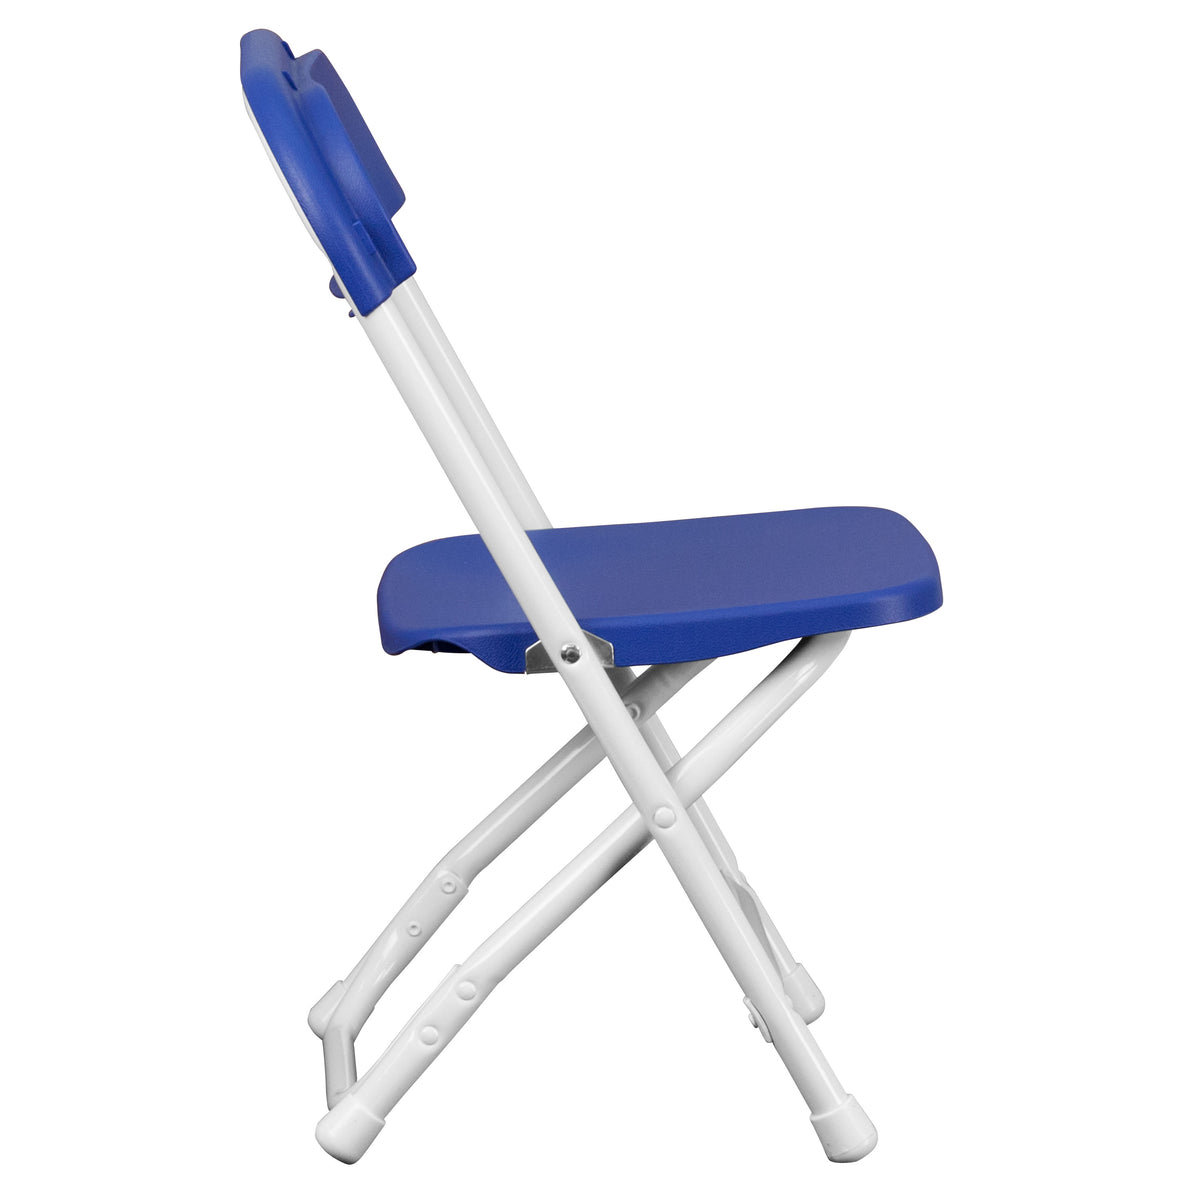 Blue |#| Kids Blue Plastic Folding Chair with Textured Seat - Preschool Seating